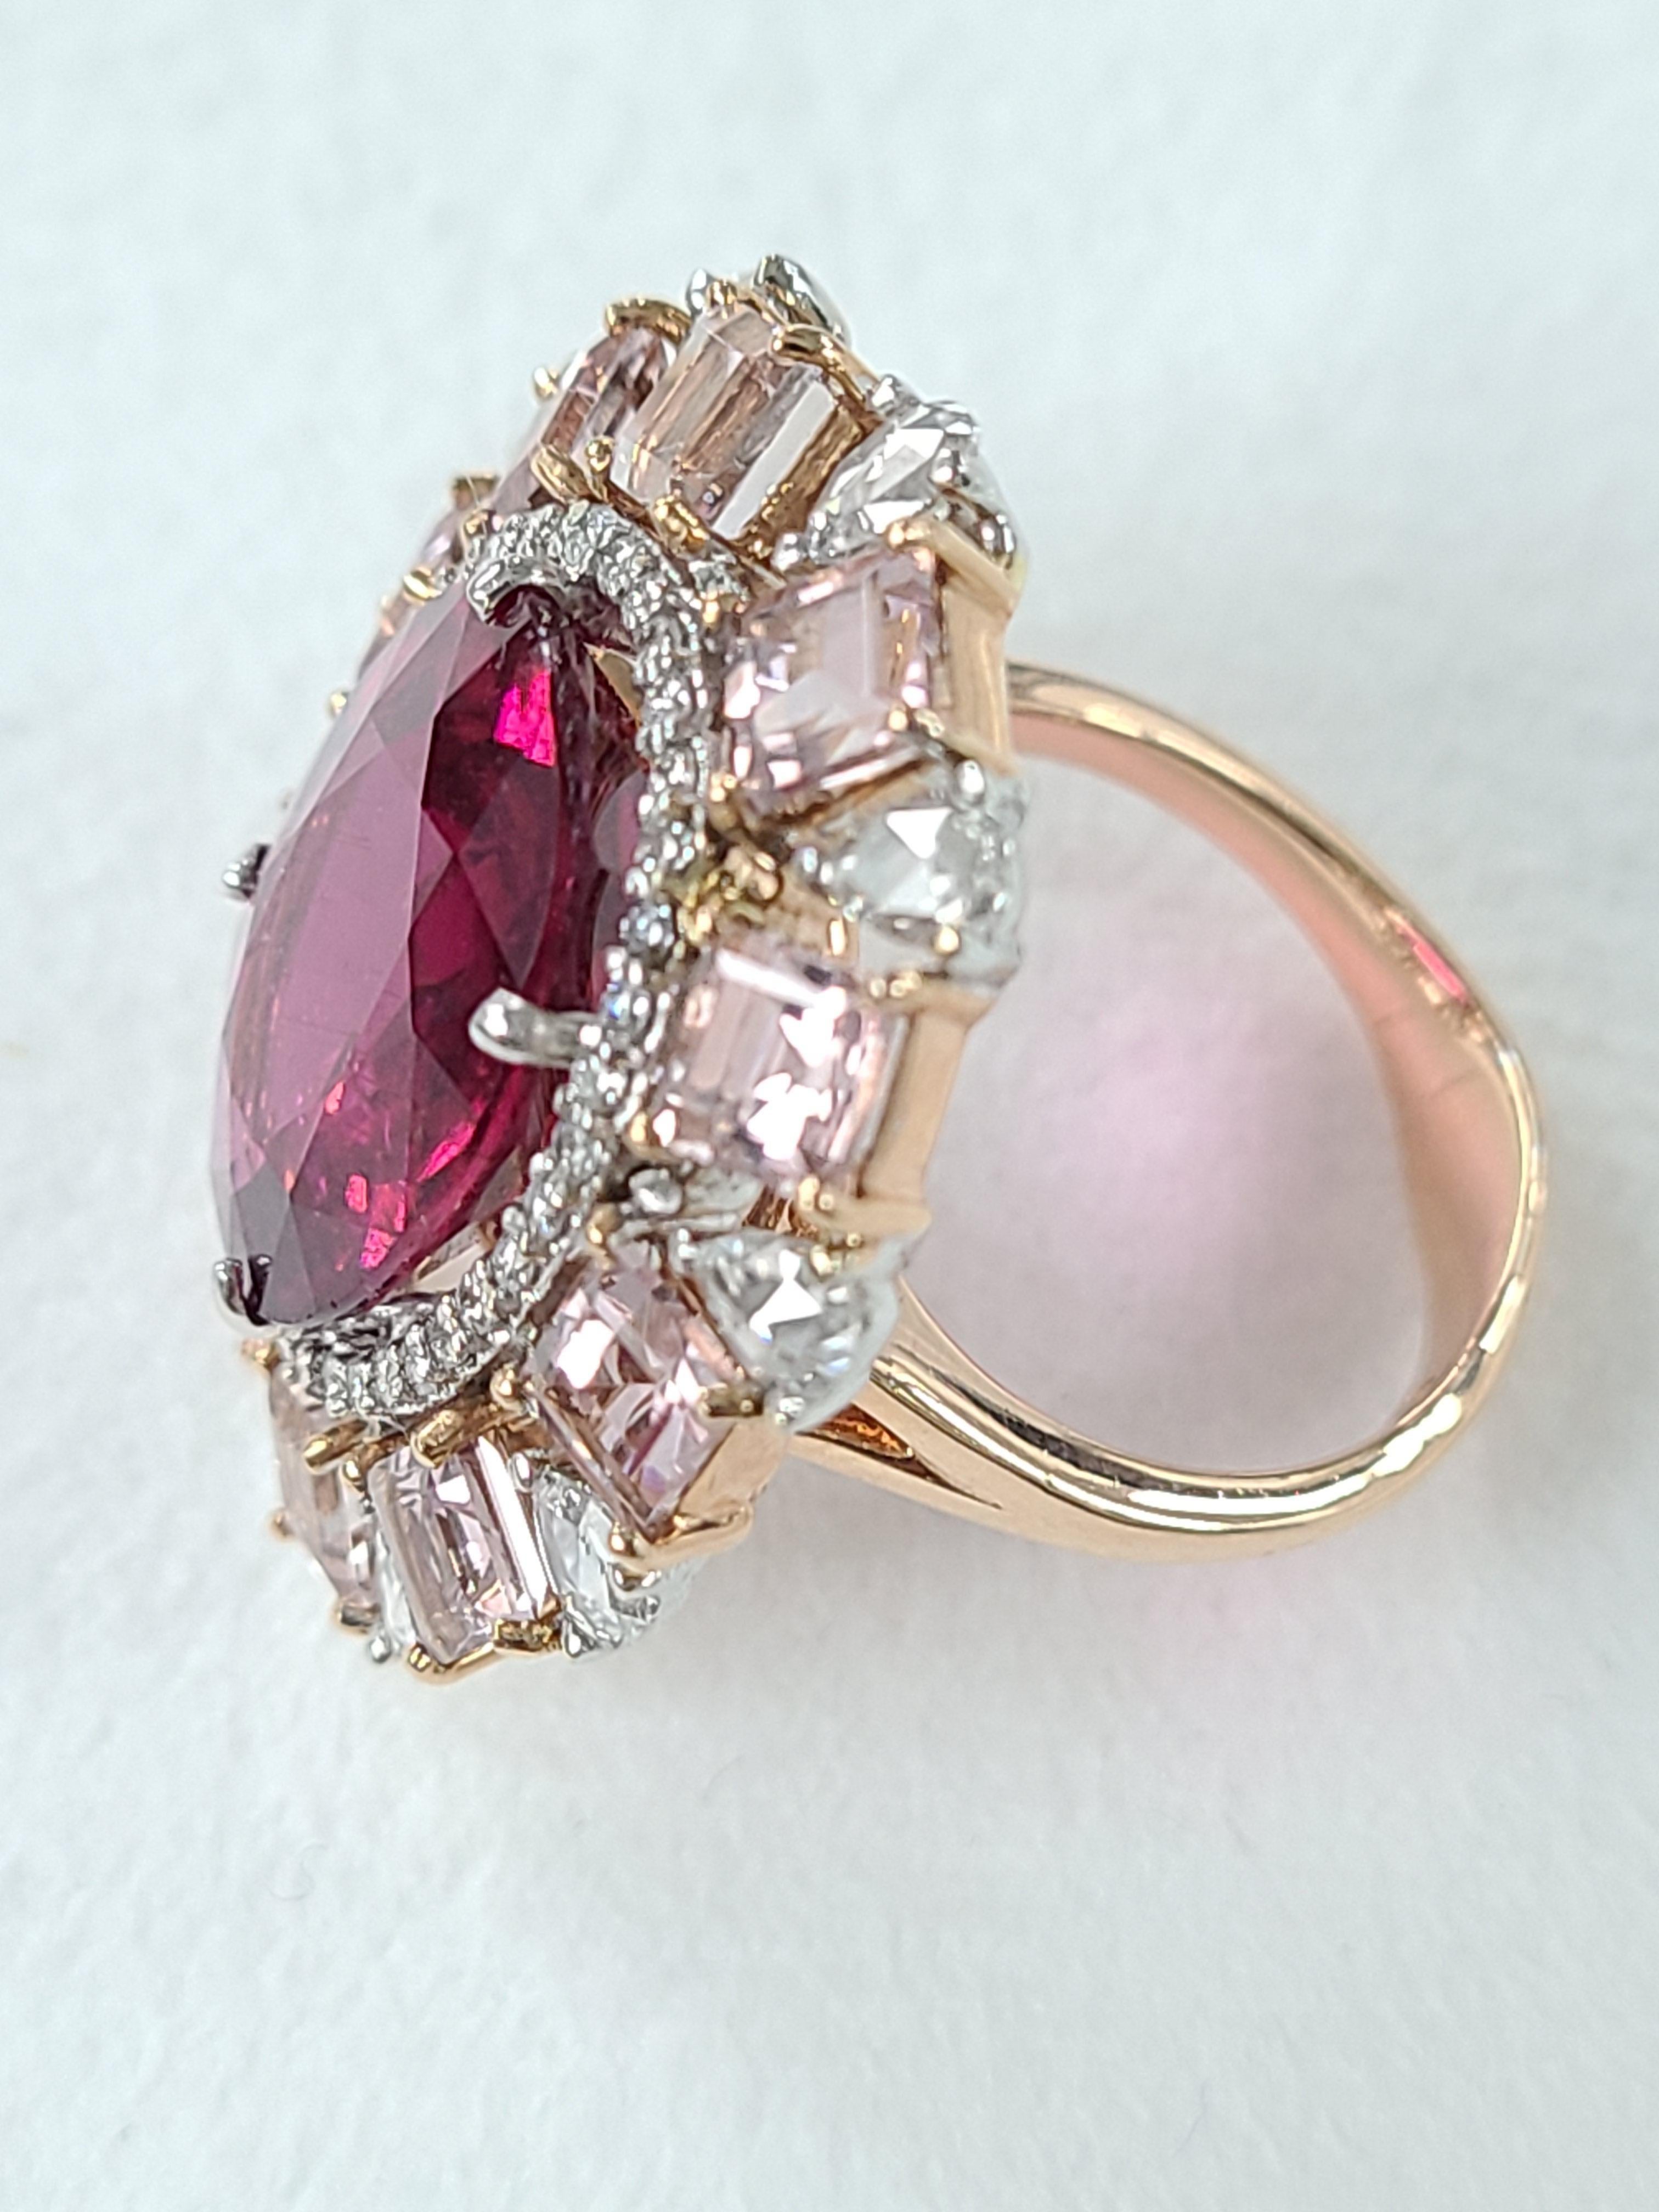 A beautiful rubellite ring surrounded by morganite and diamonds set in 18k rose gold . rubylite weight is 9.29 carats , morganite weight is 3.30 carats and combined diamond weight is 1.17 carats. Ring sixe US 6 1/2 , can be altered on request !